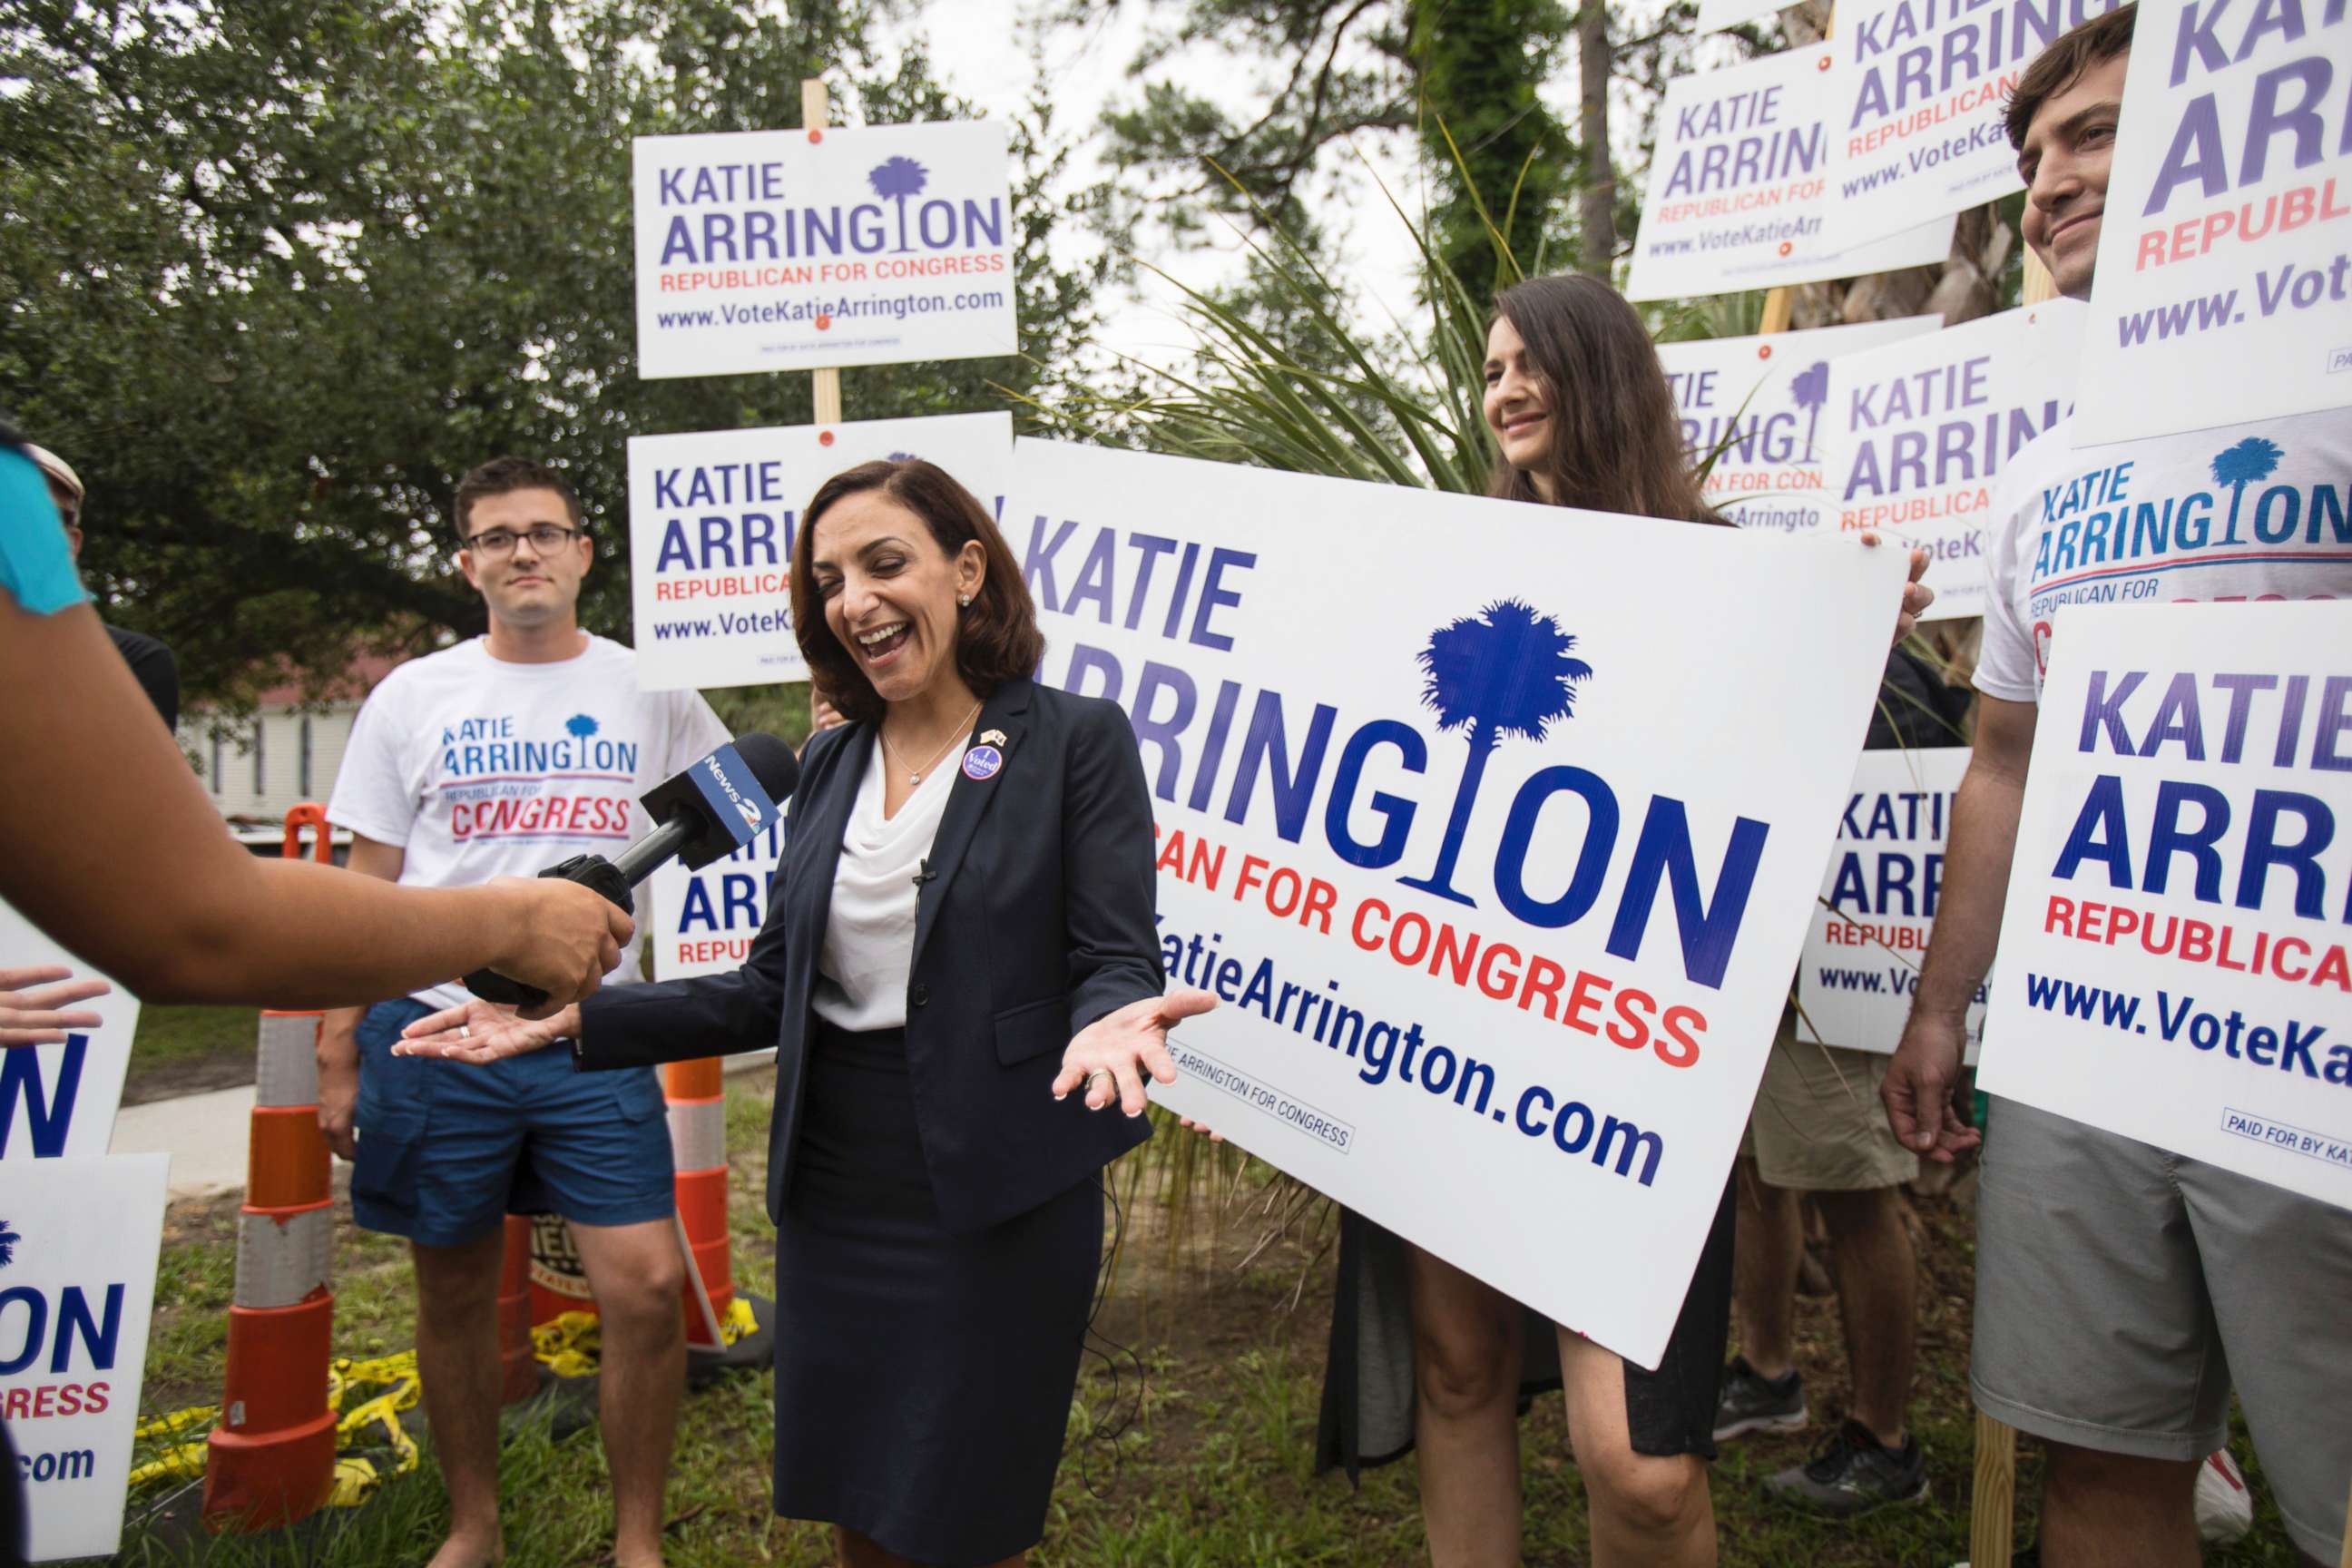 PHOTO: South Carolina Rep. Katie Arrington, who is running for the first district of South Carolina, campaigns after voting in the primary election on June 12, 2018 at Bethany United Methodist Church in Summerville, South Carolina. 